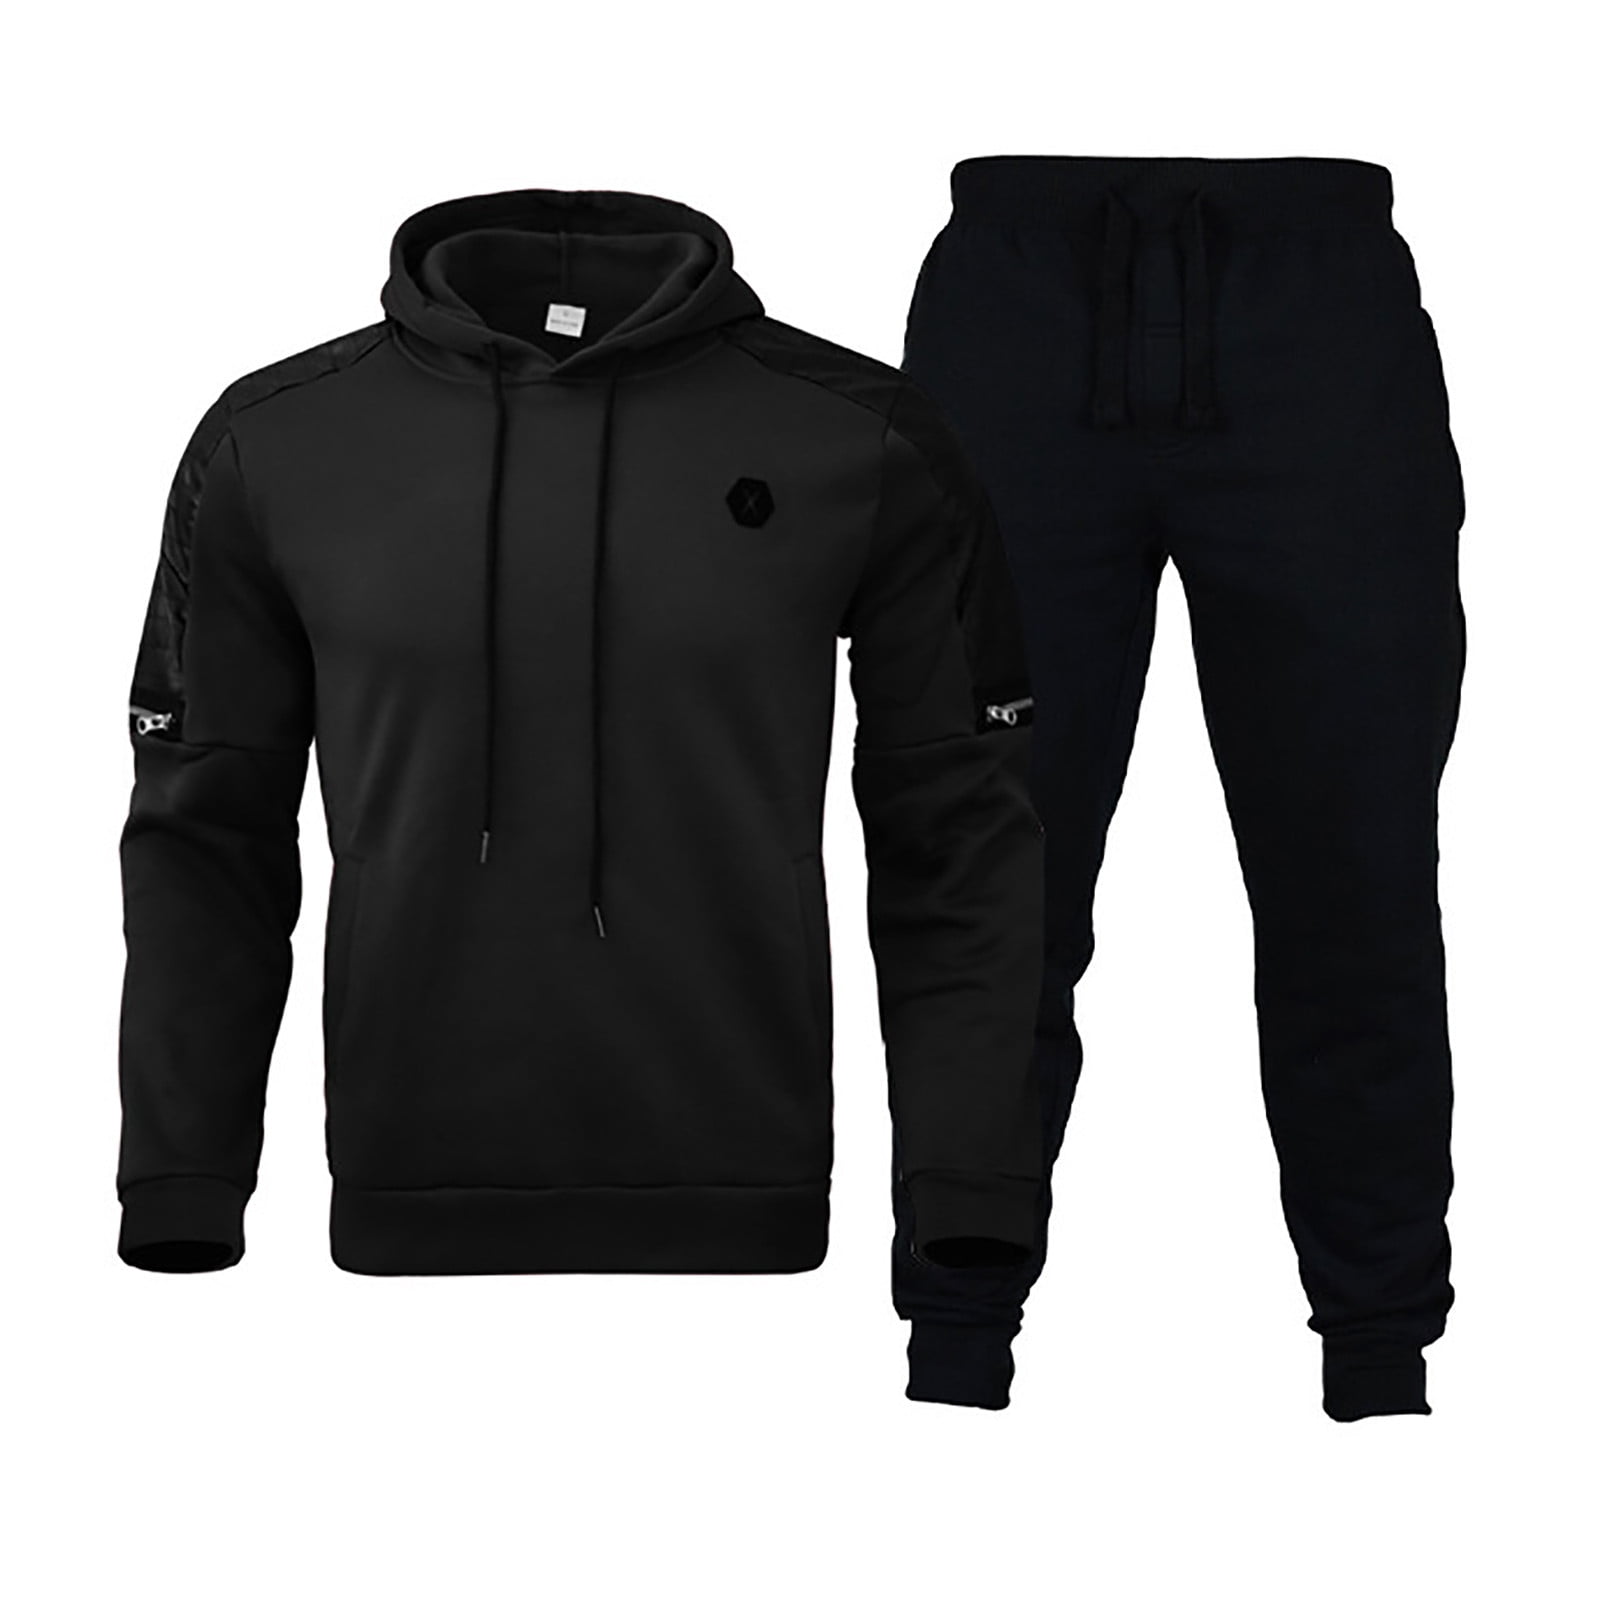 symoid Mens Athletic Sweatpants- Sweatpants Suit Casual Sweater Fitness ...